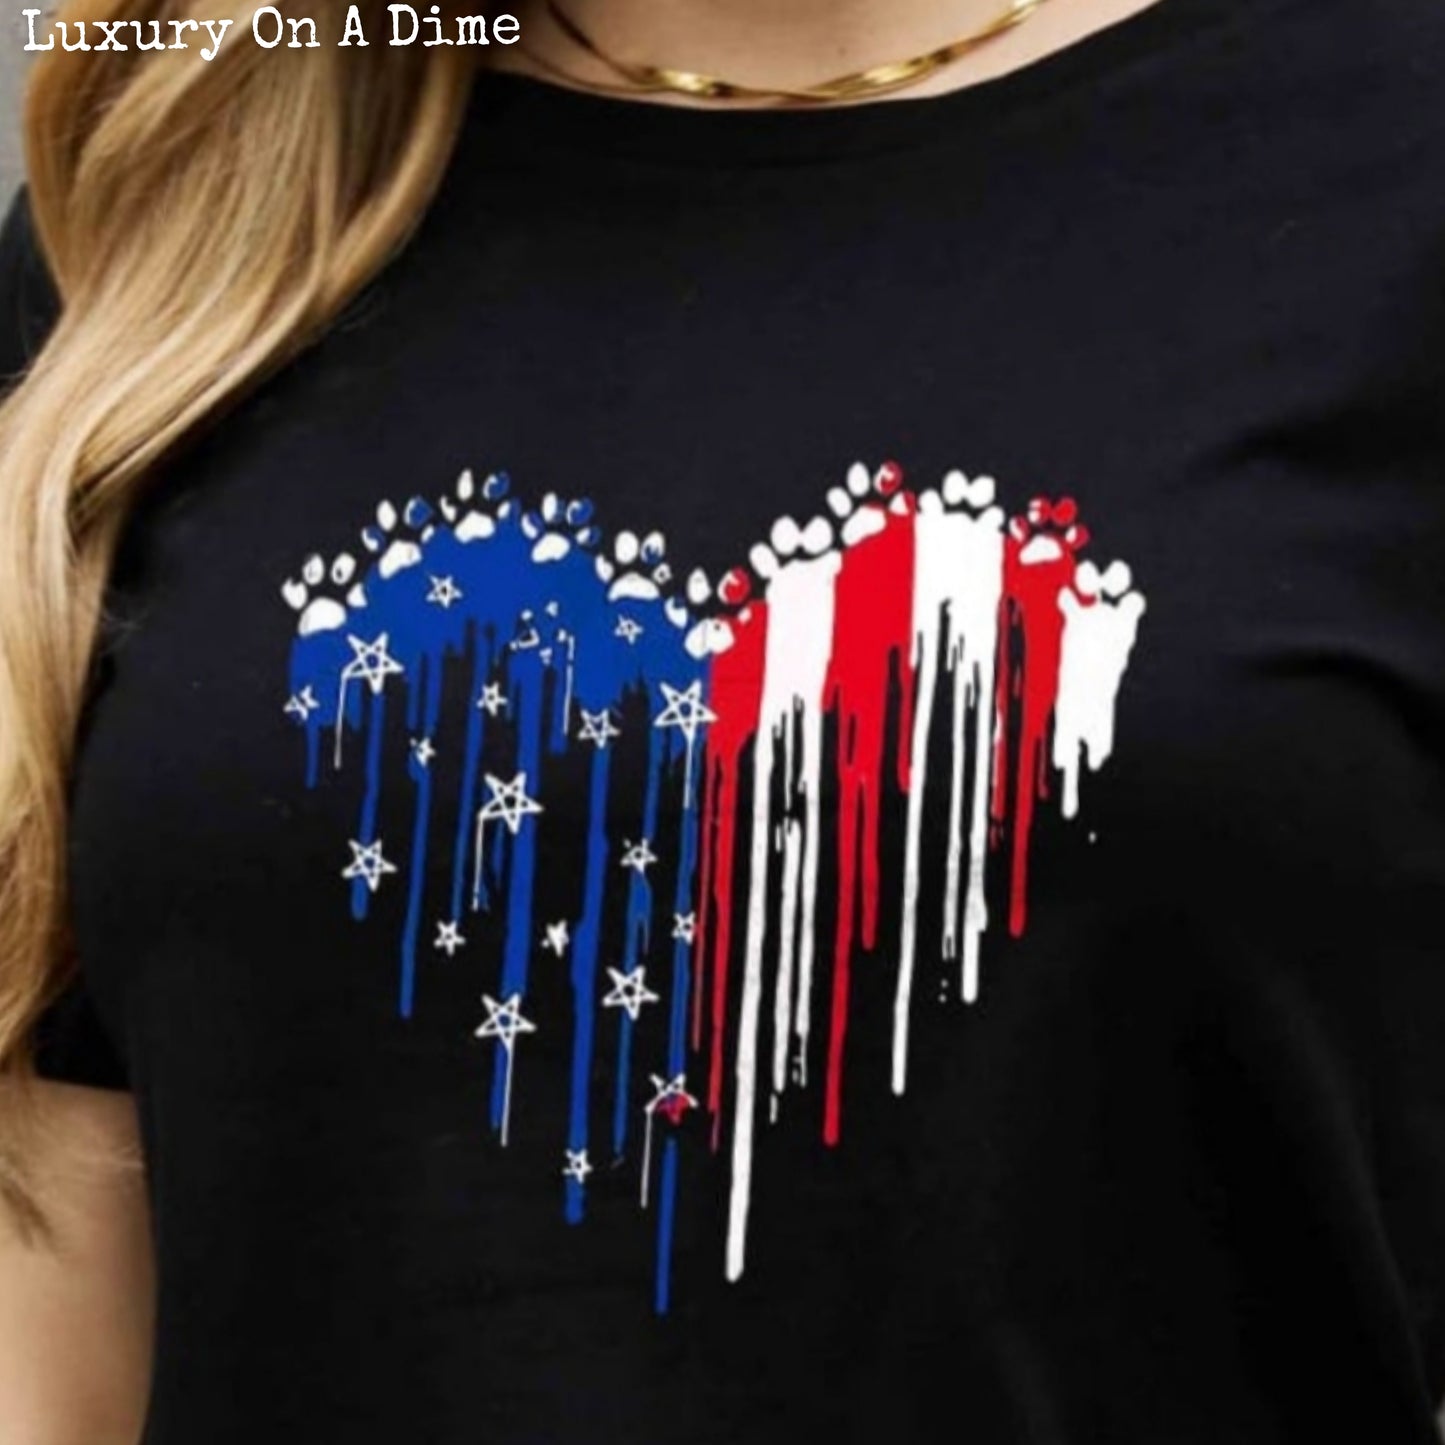 Paw-Print US American Flag Heart Graphic 100% Cotton Short-sleeve Tee Shirt (Plus Size Available)